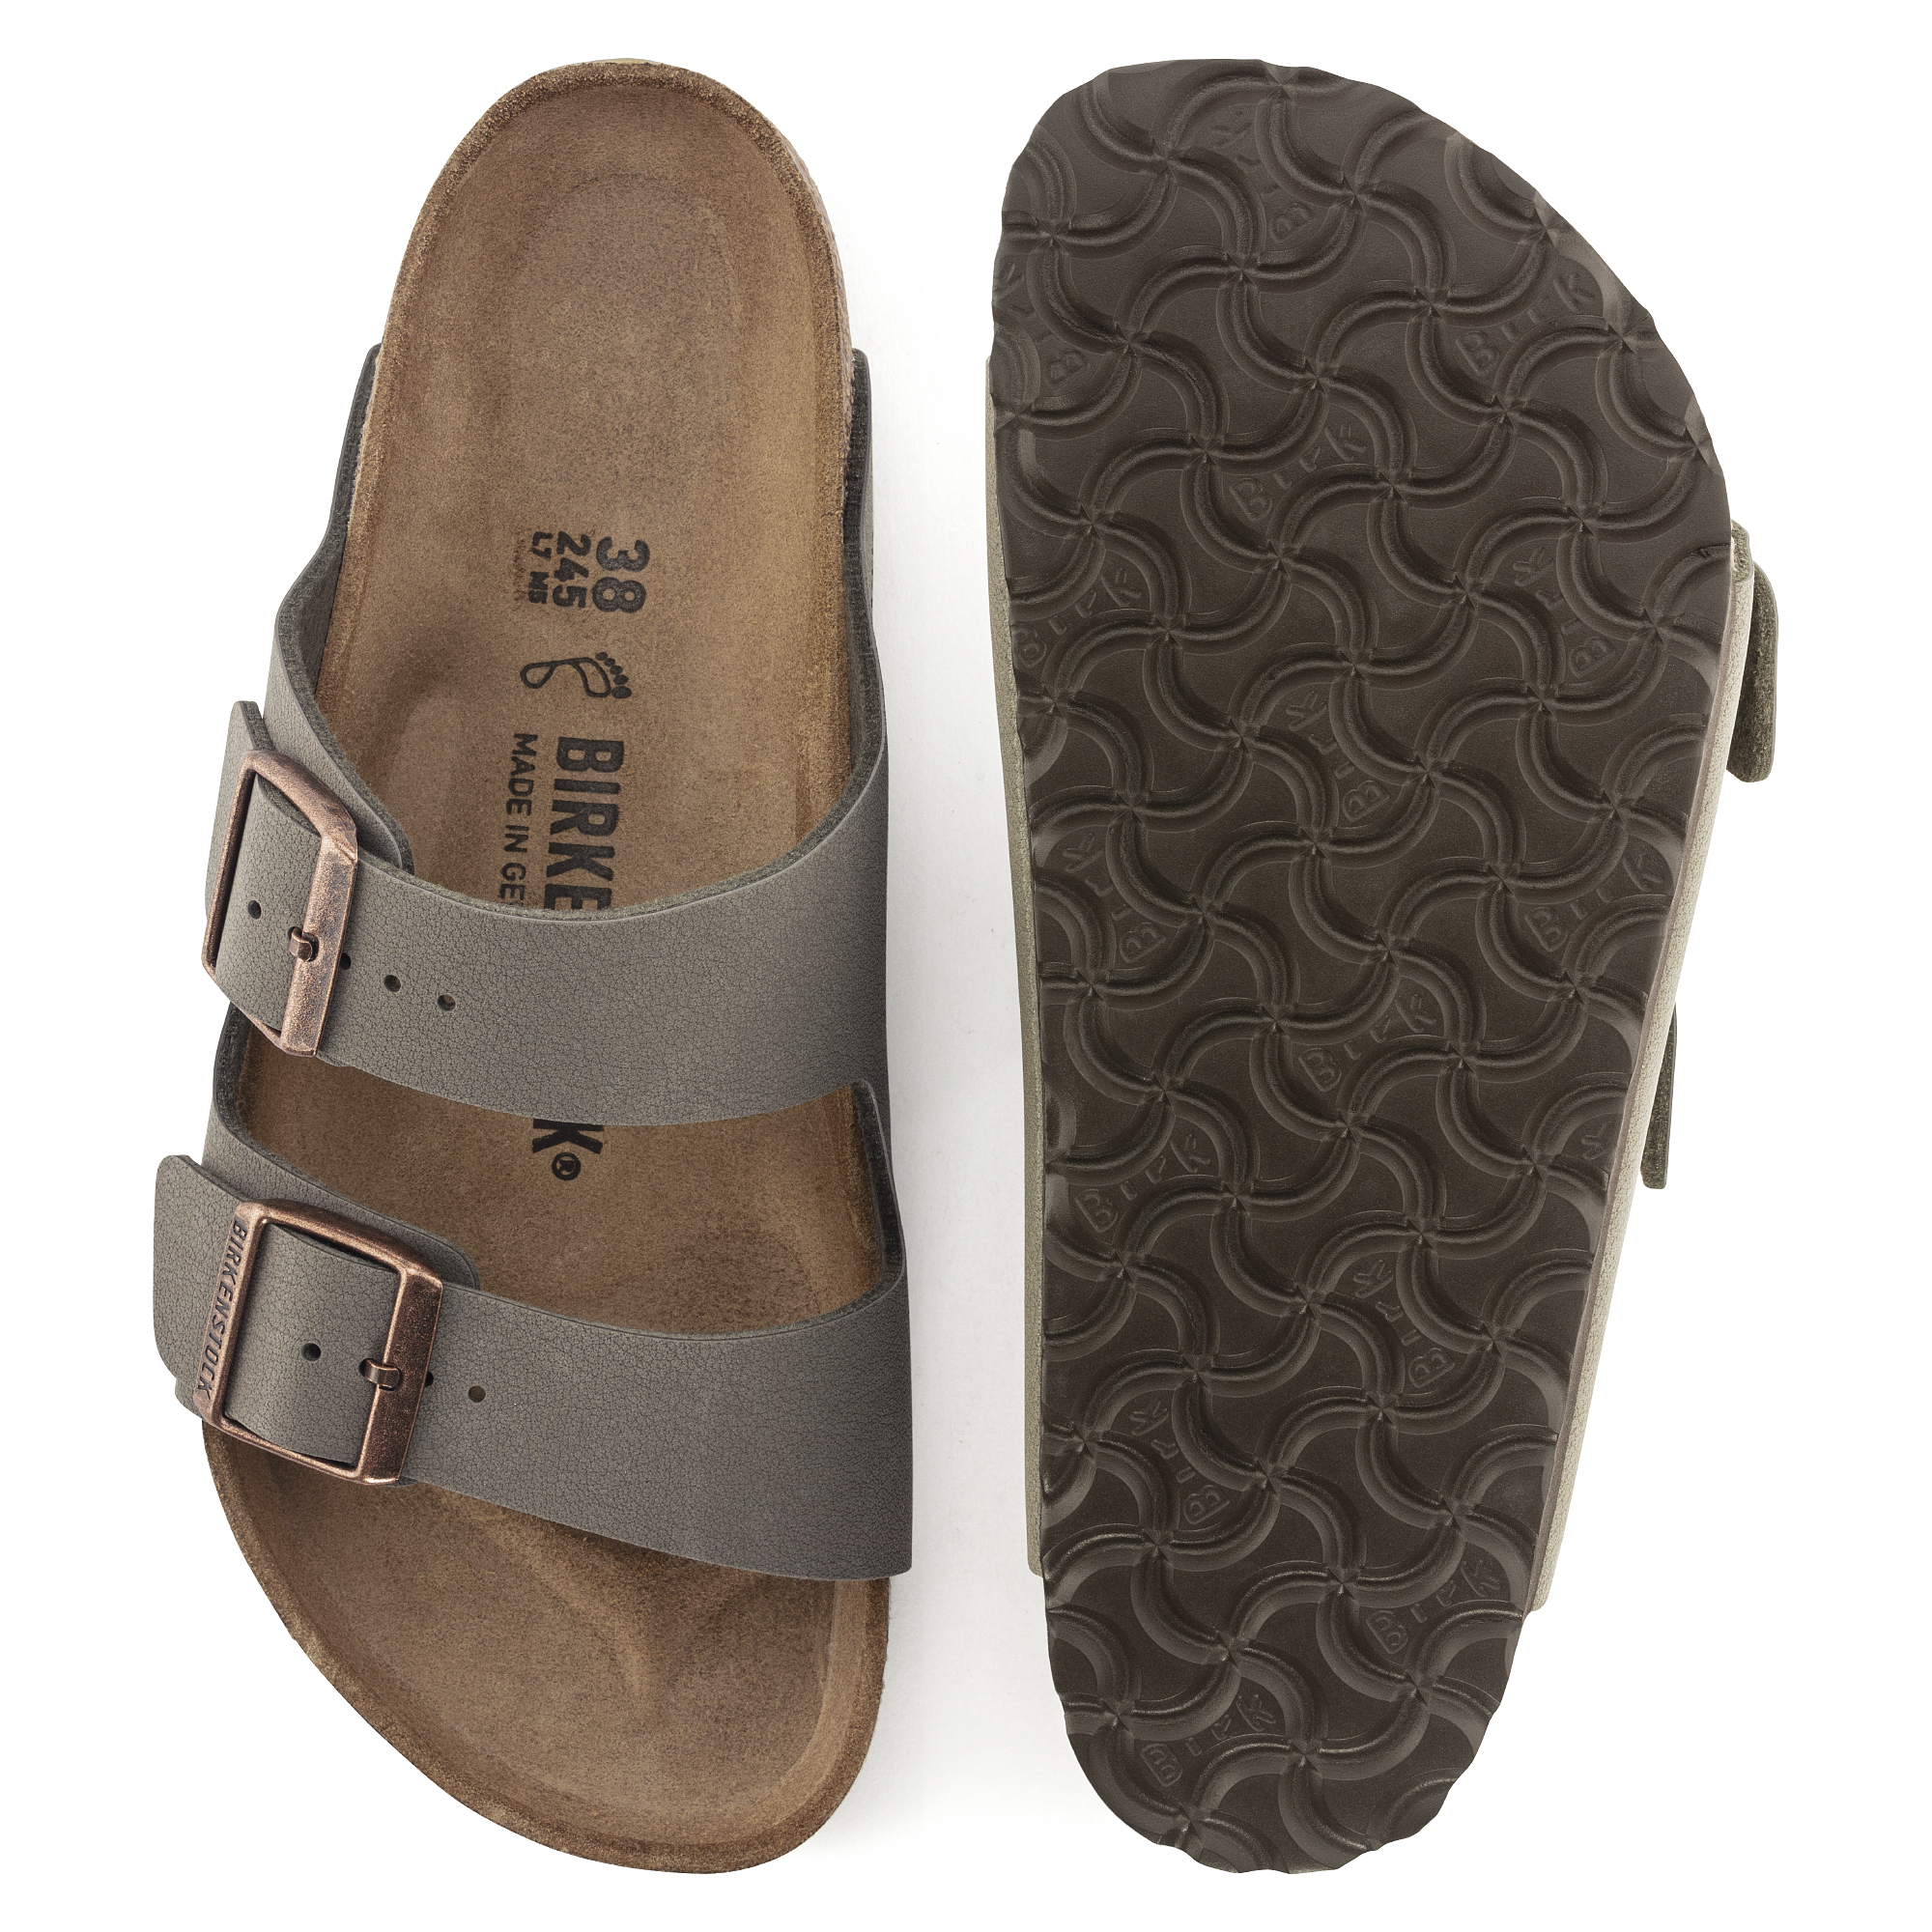 Why Birkenstock Slippers Are the Ultimate Comfort Footwear 4 - whitechaco.com